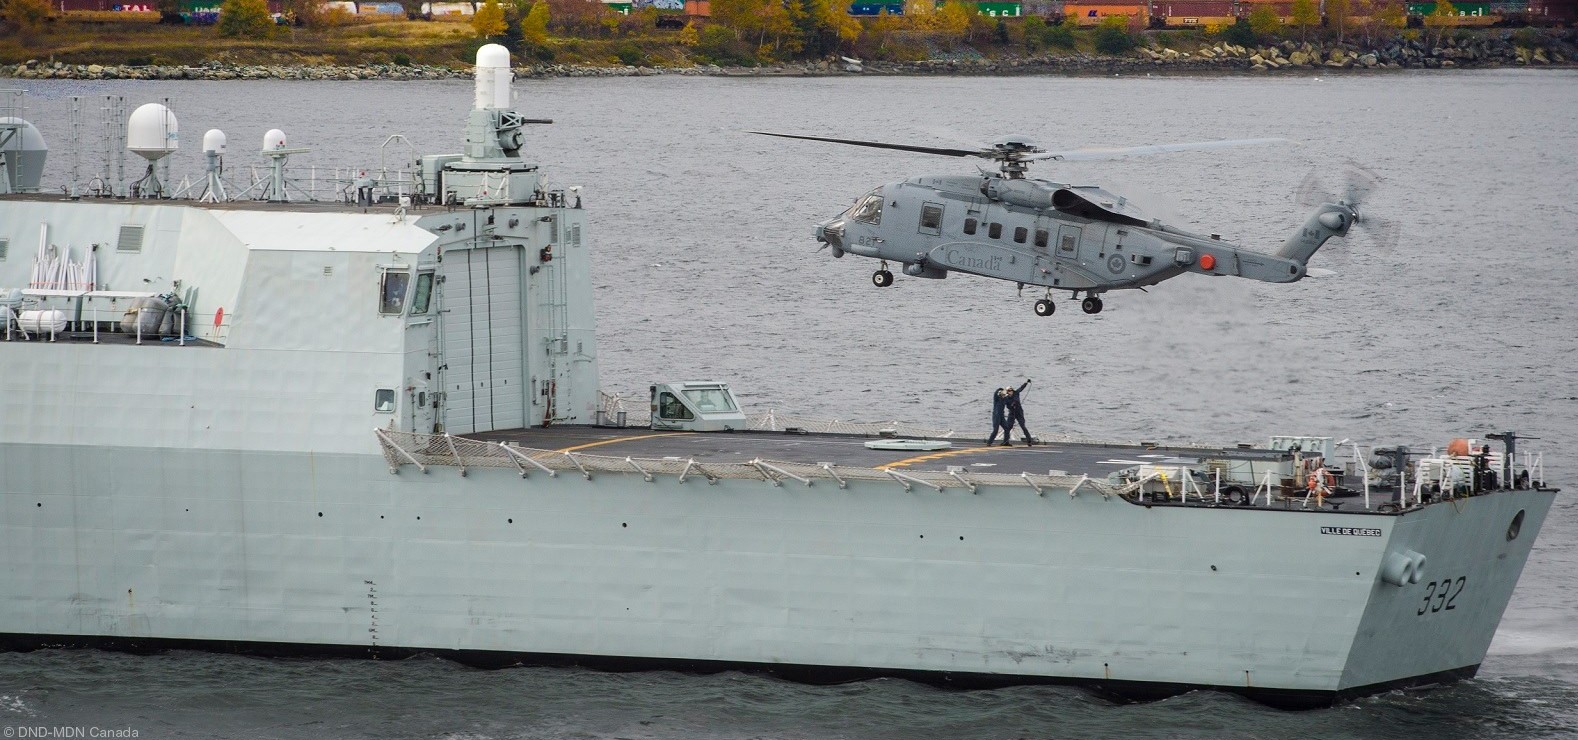 halifax class helicopter patrol frigate royal canadian navy 41c ch-148 cyclone flight deck